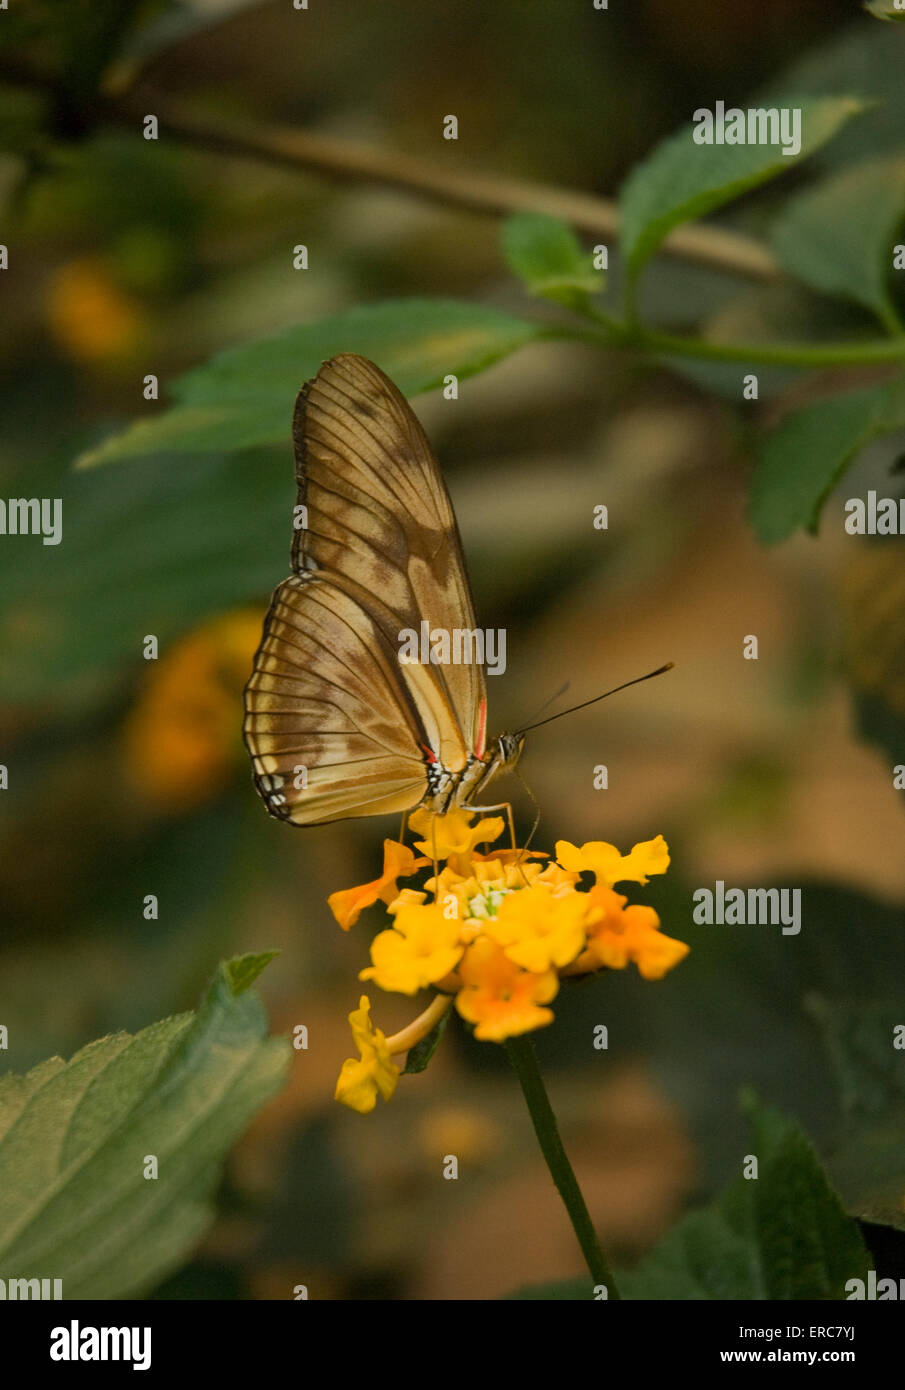 BROWN COLORED BUTTERFLY ON FLOWER Stock Photo